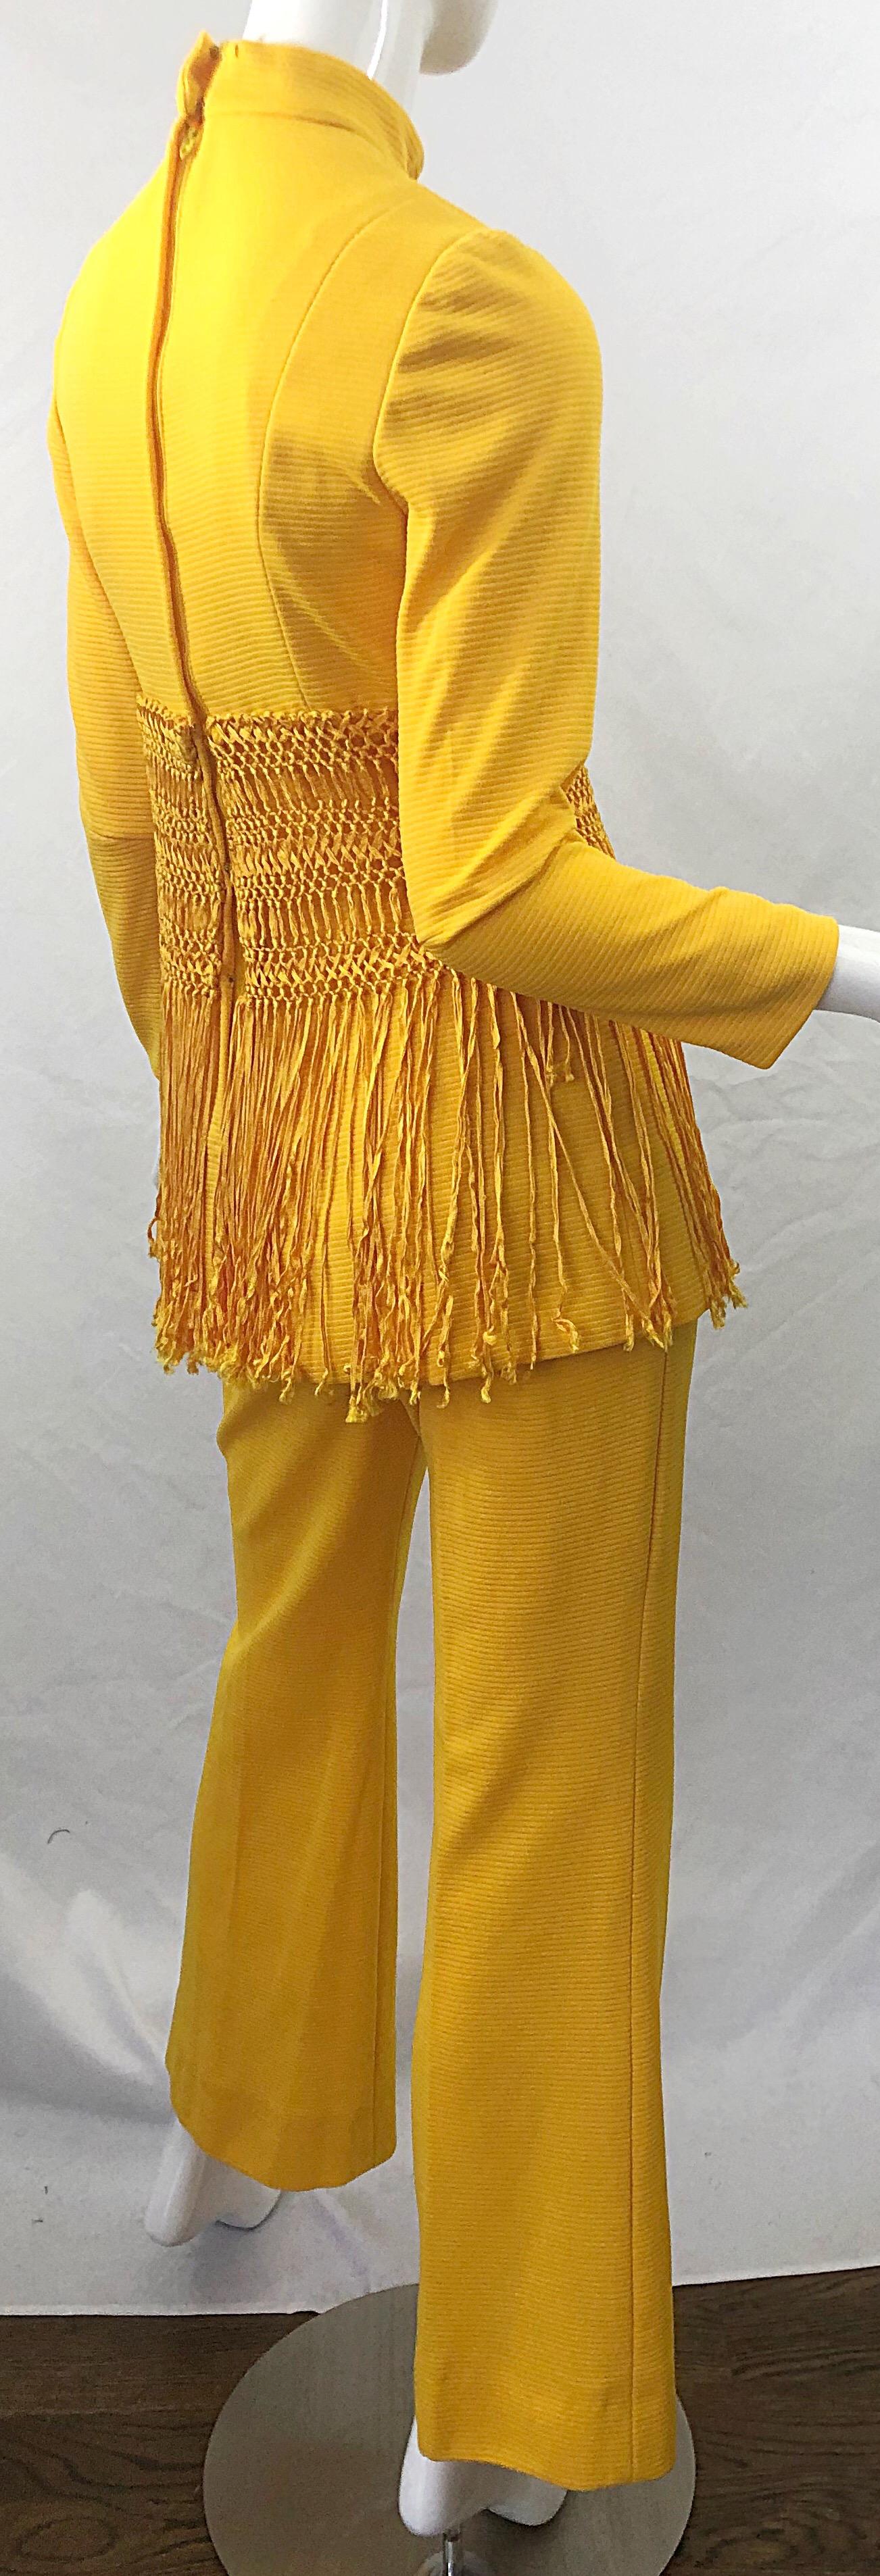 1970s Canary Yellow Fringe Vintage Knit Tunic Top + 70s Bell Bottom Flared Pants 3